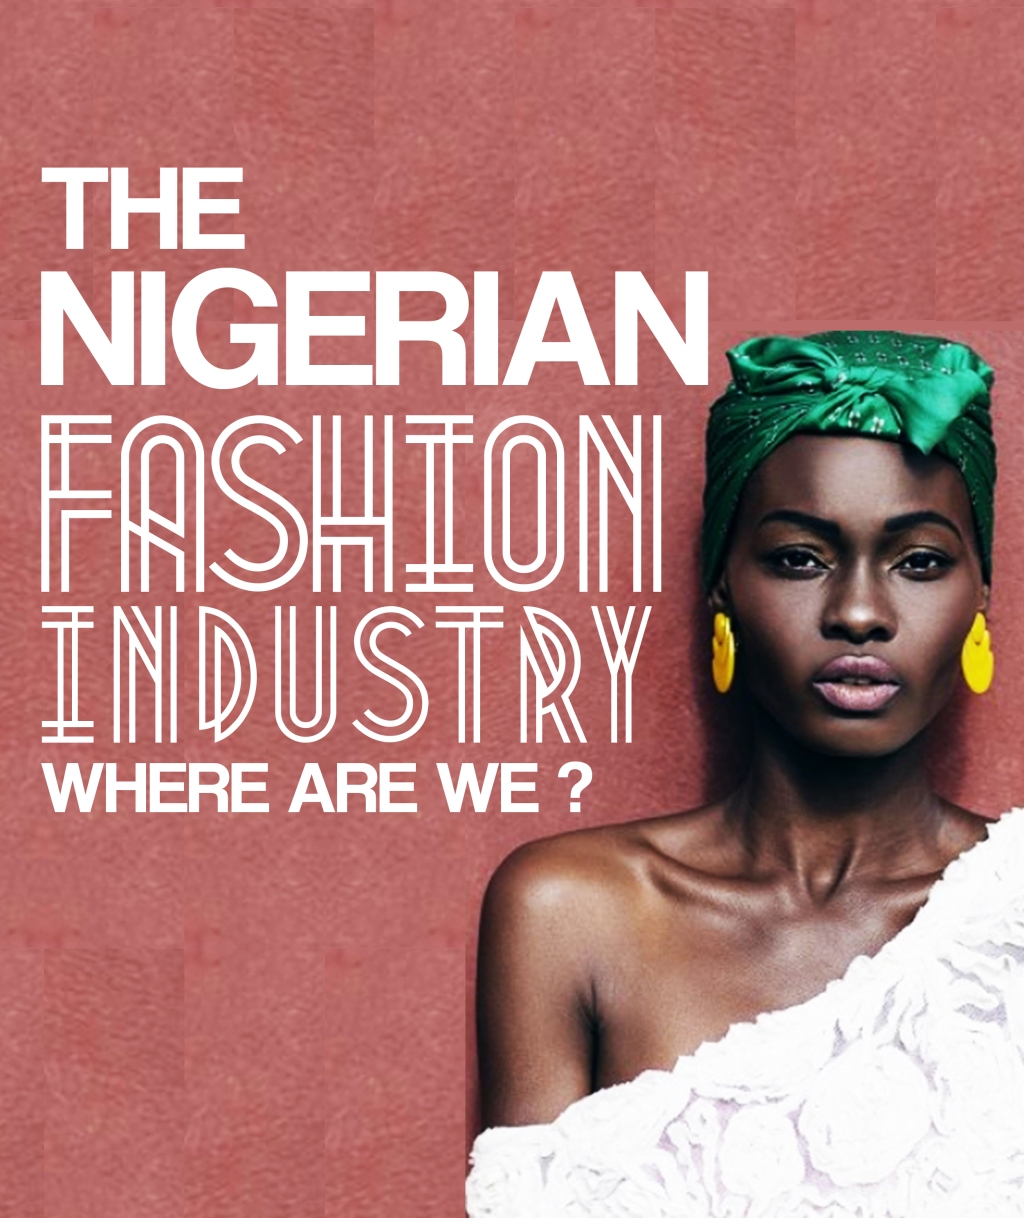 The Nigeria Fashion Industry: Where Are We?